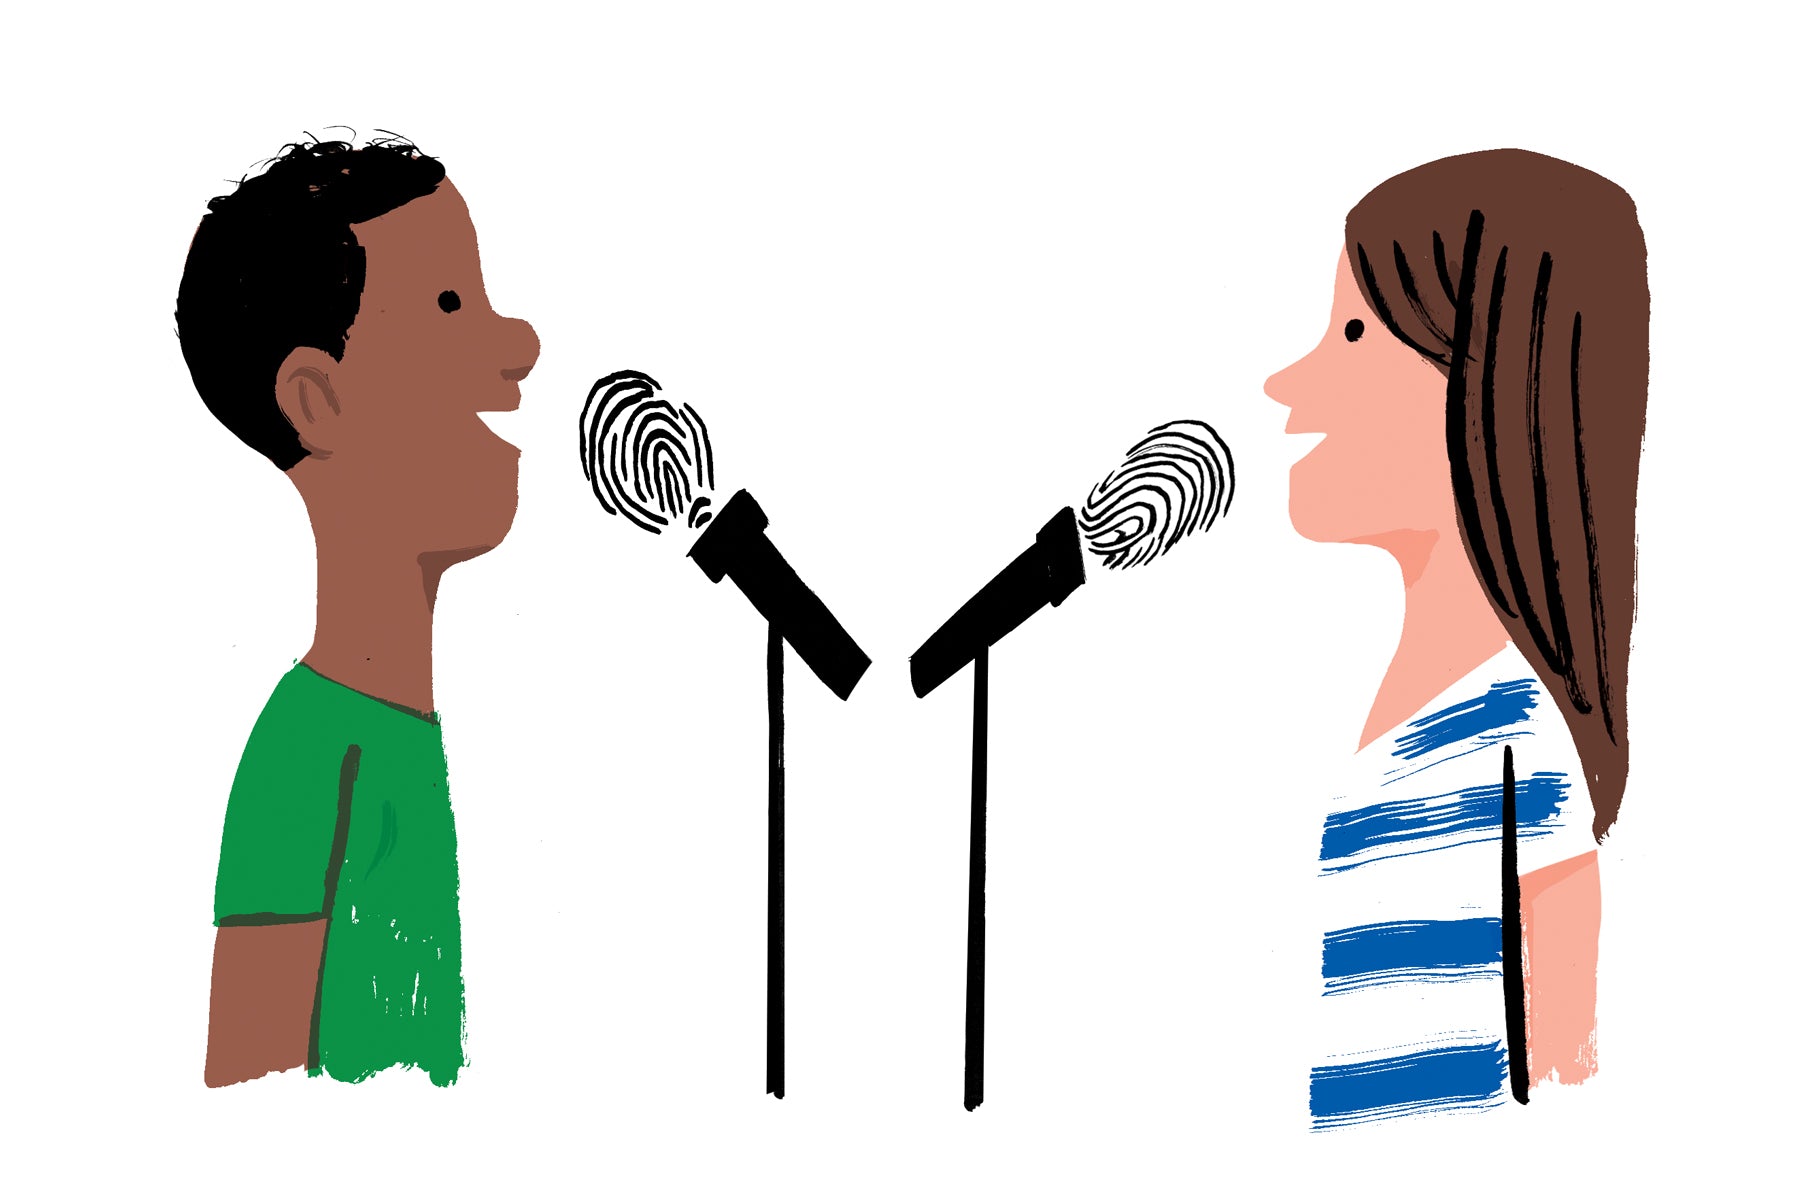 Illustration of two young children, one black, one white, speaking into a microphone as if introducing themselves.